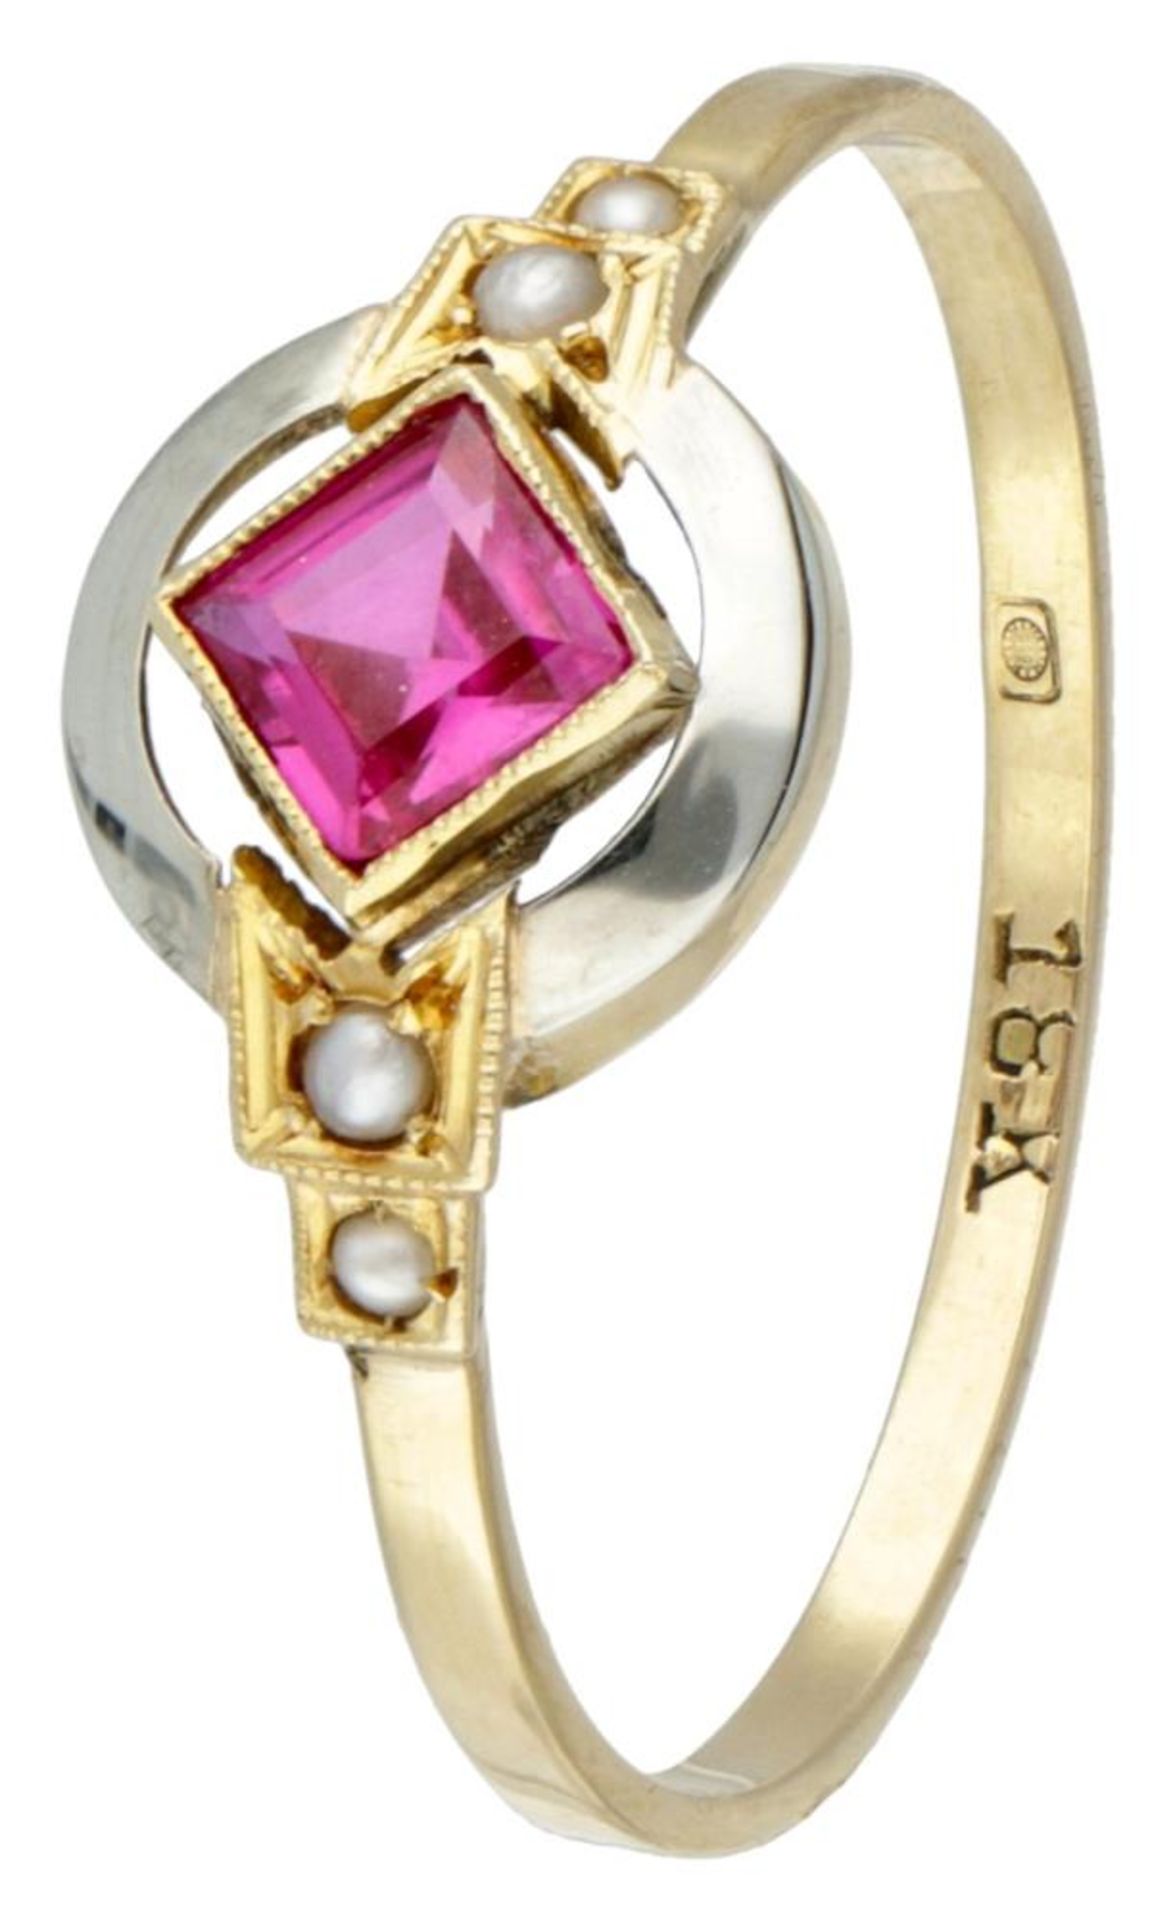 14K. Bicolor gold antique ring set with a synthetic ruby and seed pearls.